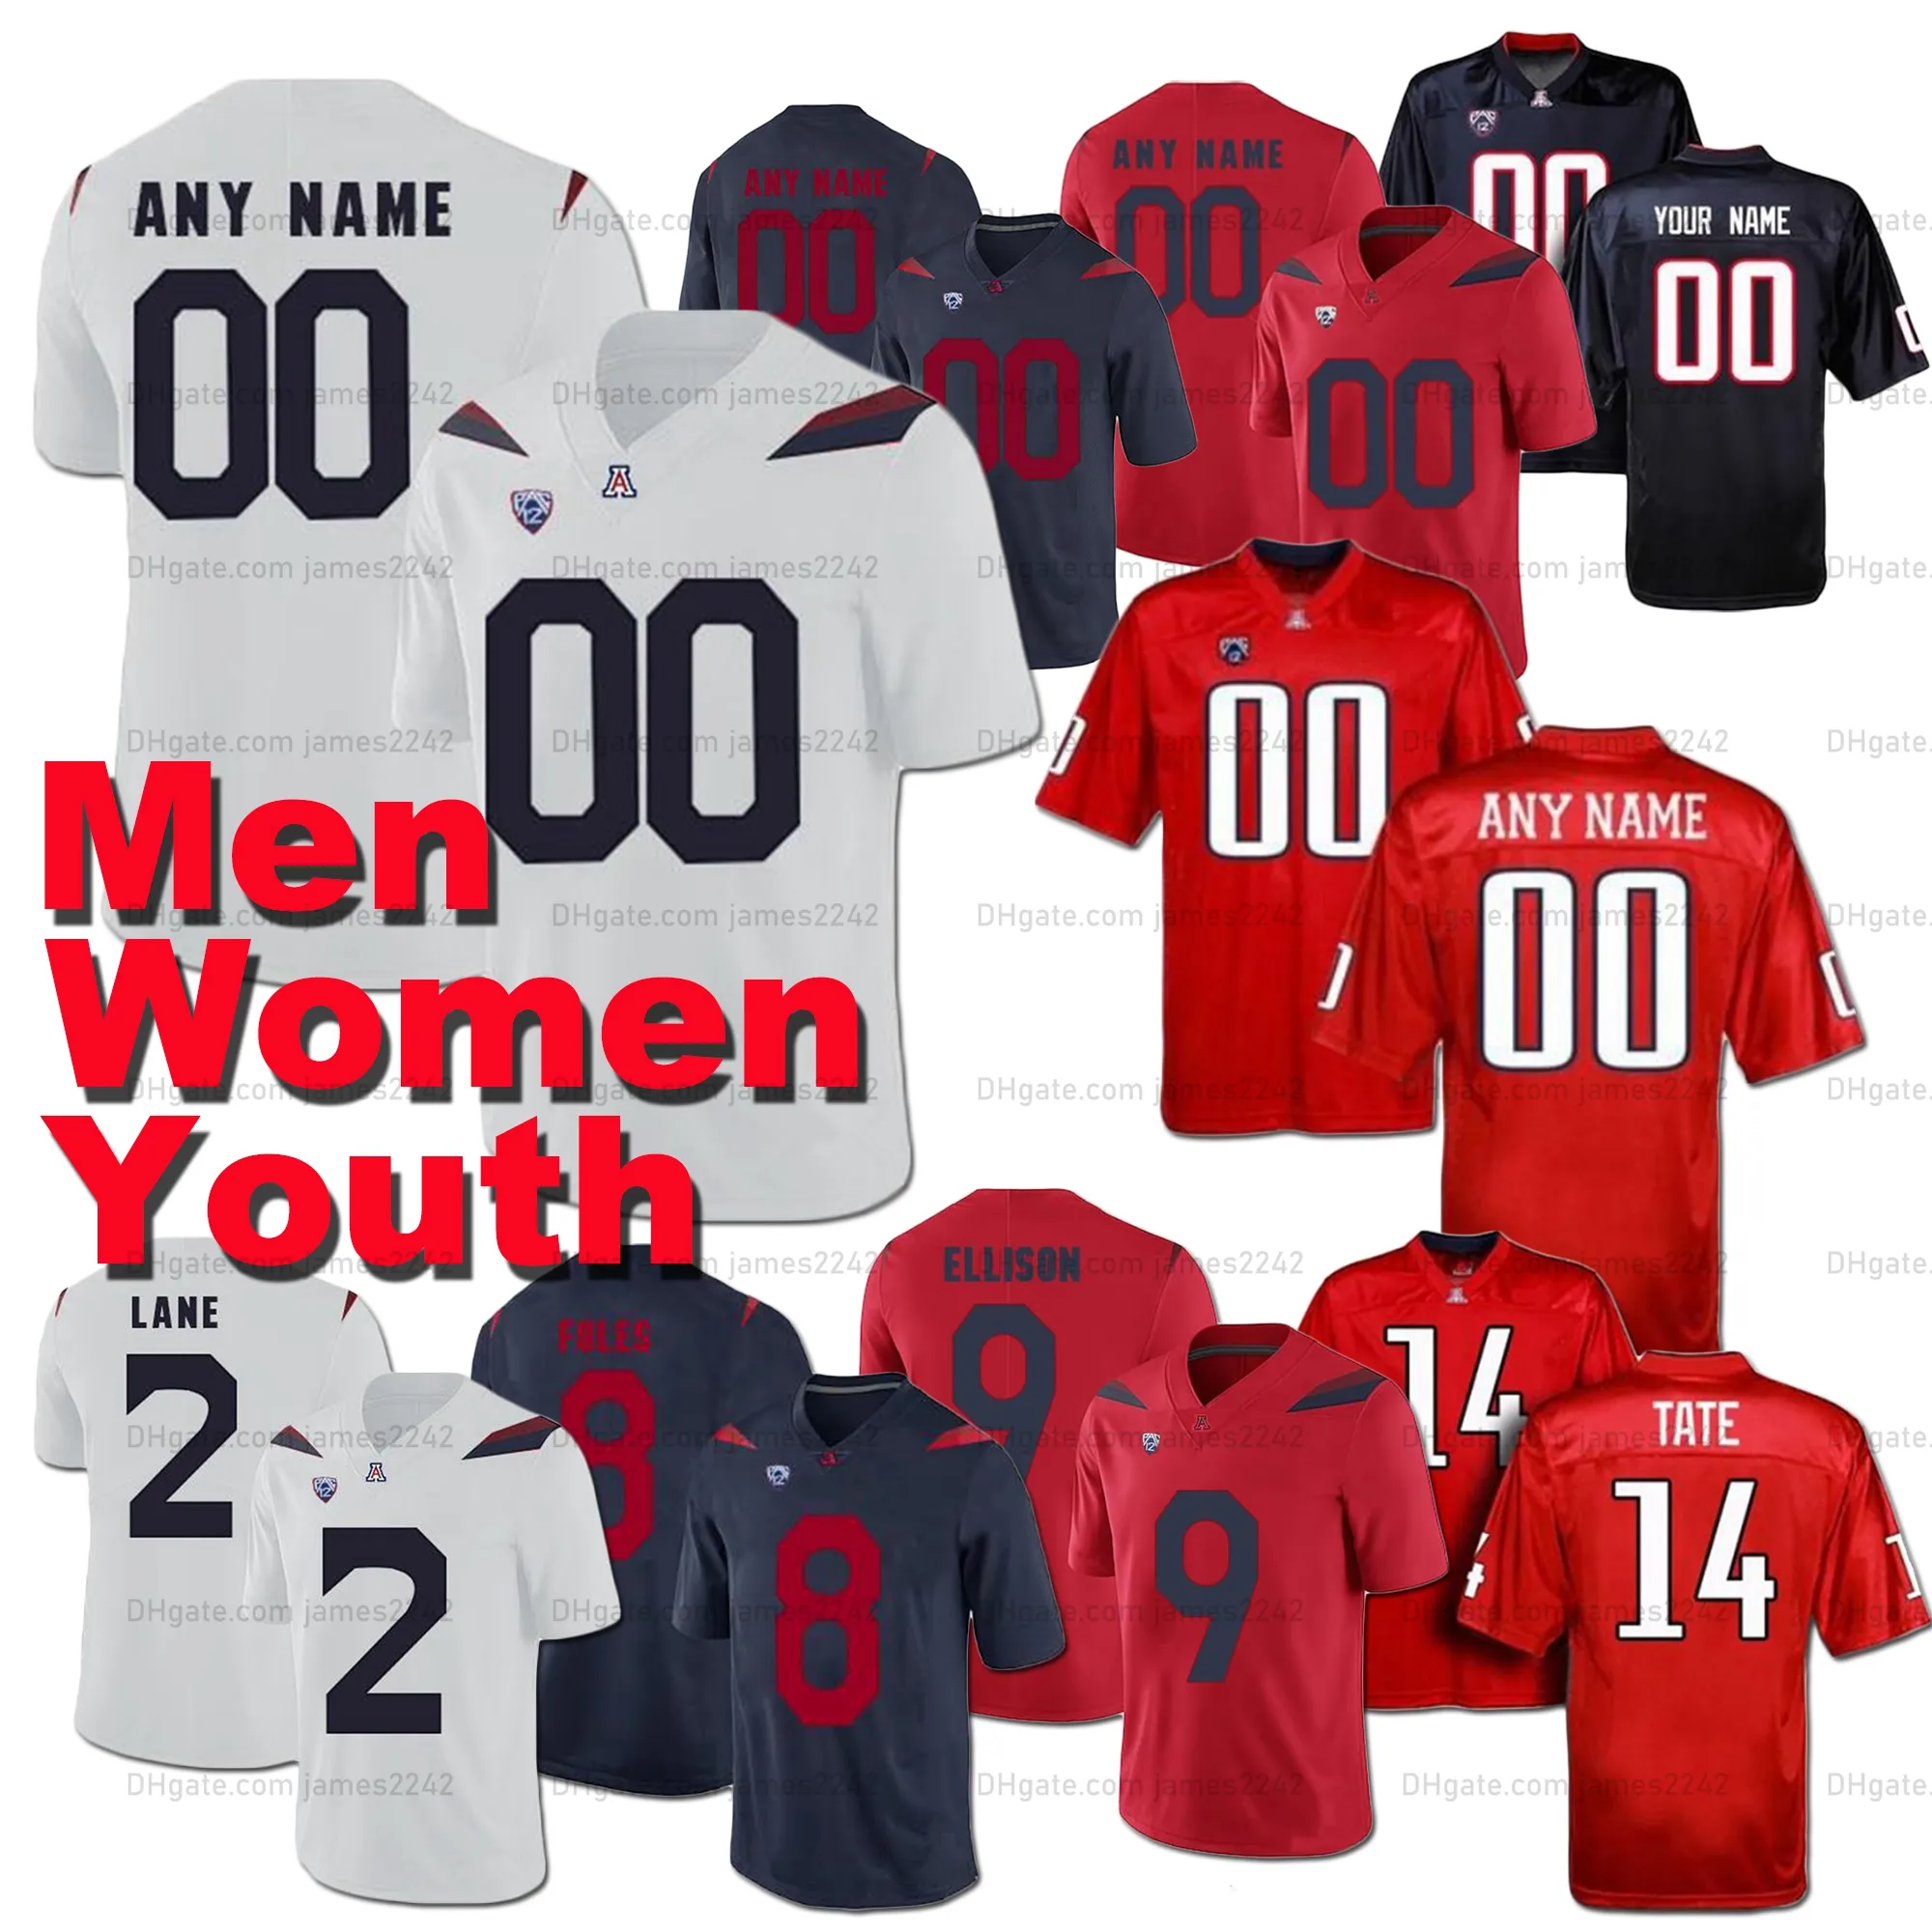 Personalizado Homens Mulheres Juventude College Football Jersey K Hari Lane Rob Gronkowski Grant Gunnell Gary Brightwell Stanley Berryhill III Anthony Pandy Nick Foles Smith Taylor